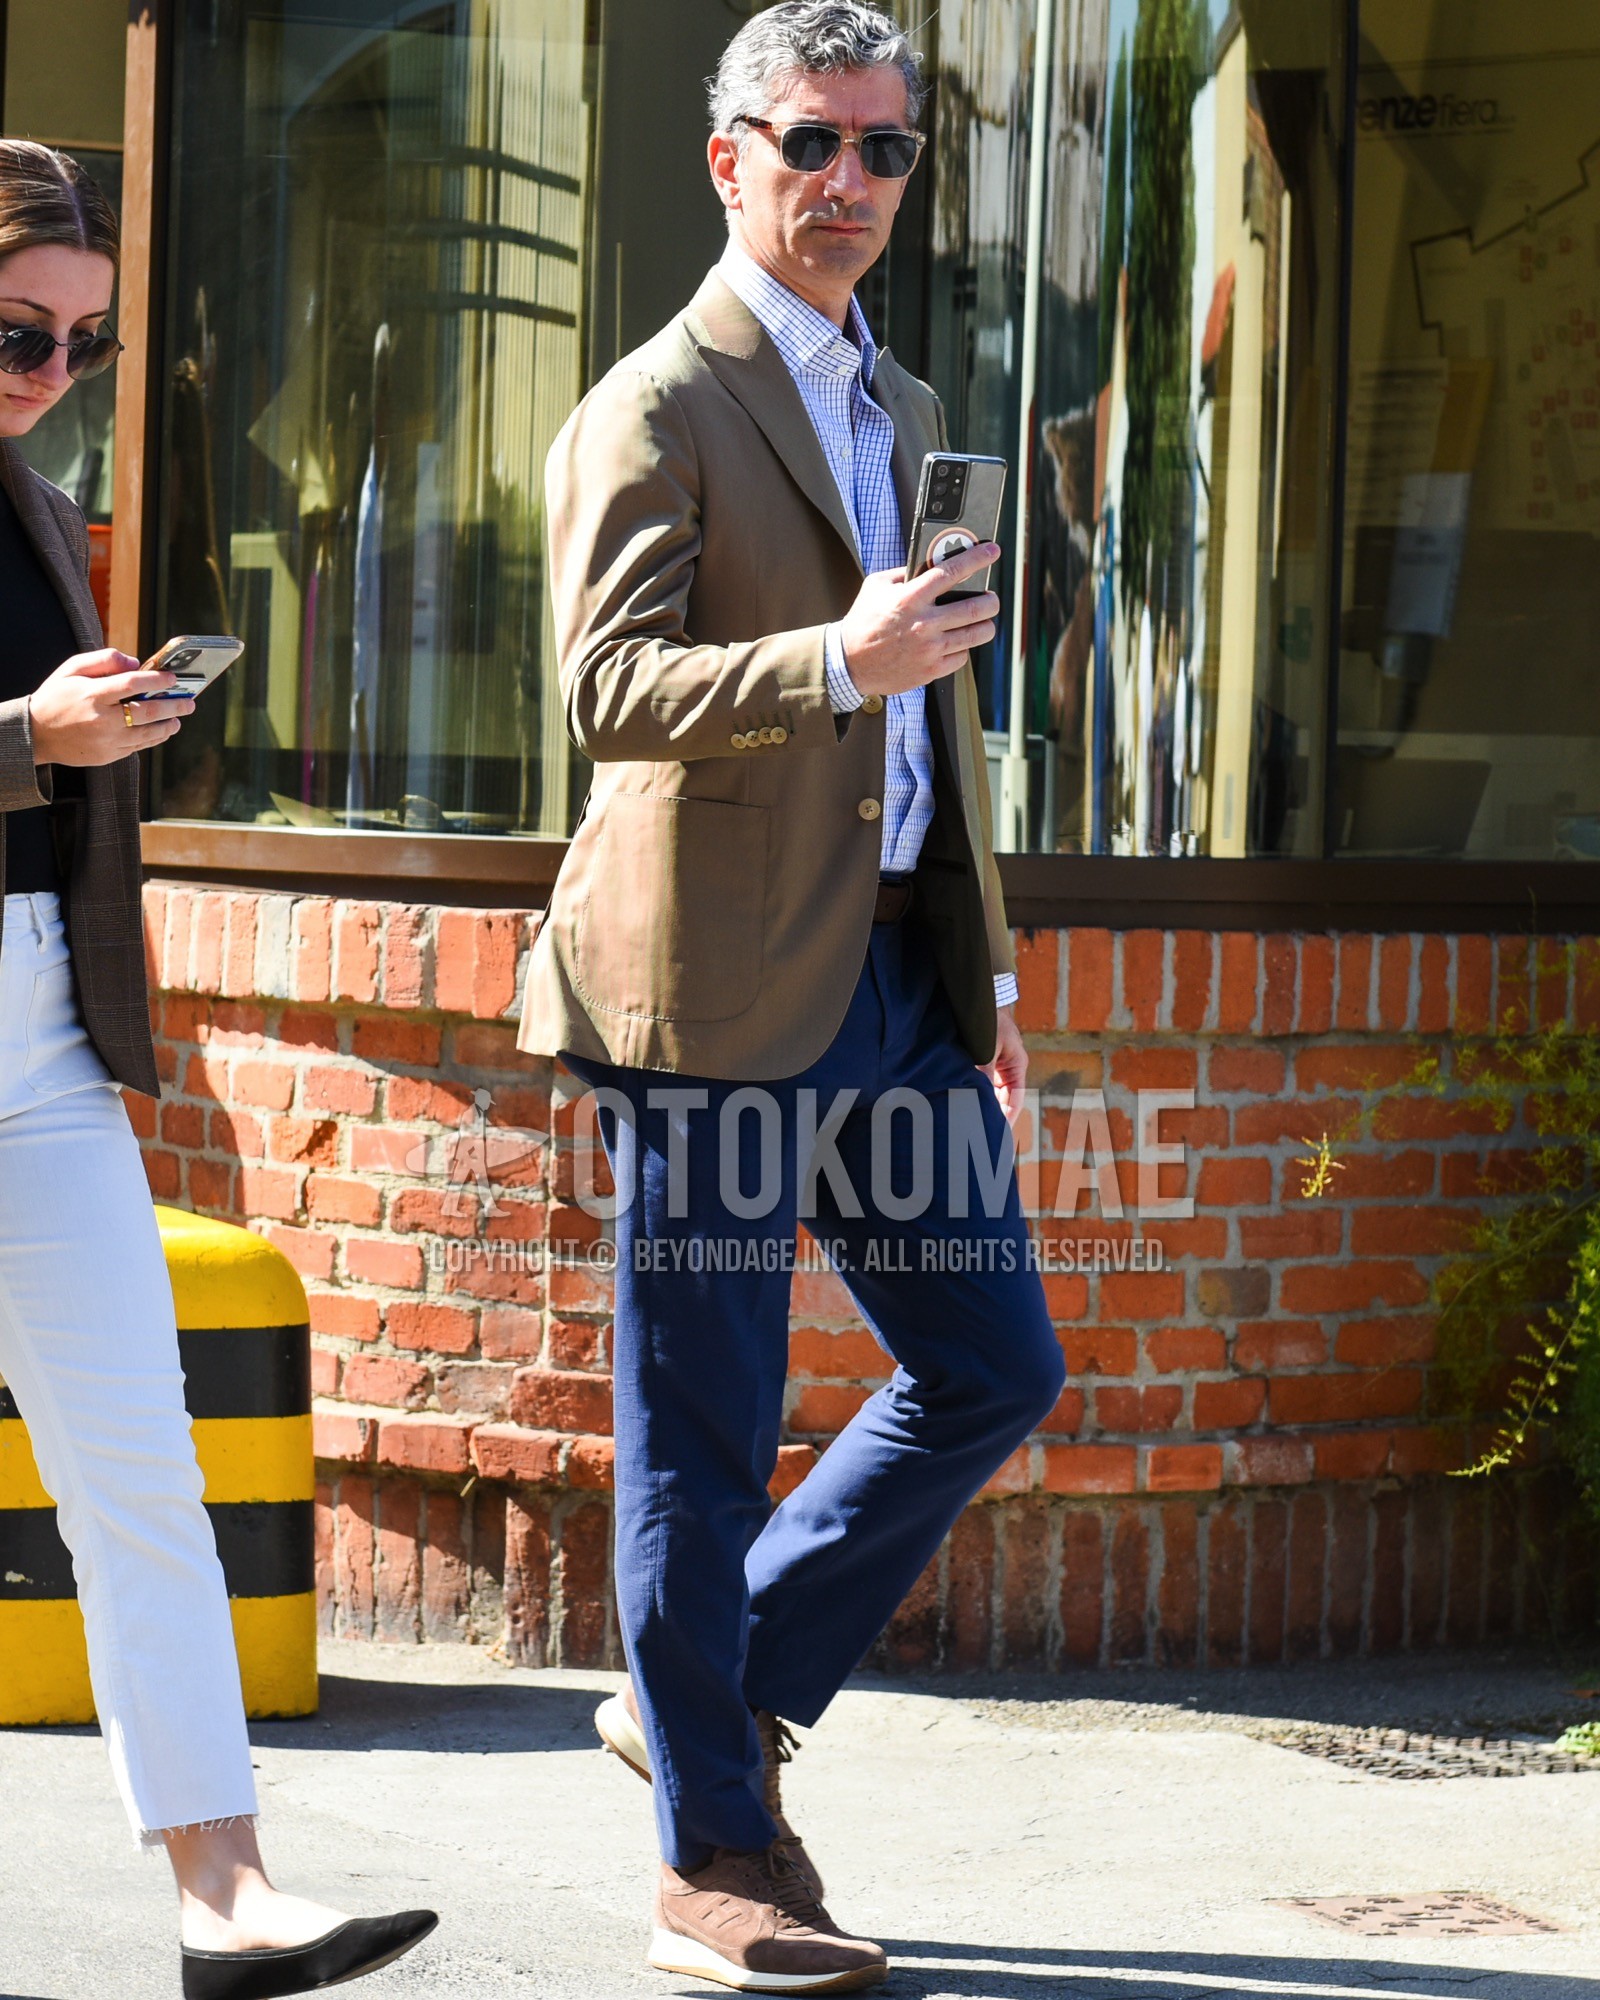 Men's spring summer outfit with clear brown tortoiseshell sunglasses, brown plain tailored jacket, blue white check shirt, brown plain leather belt, navy plain slacks, brown low-cut sneakers.